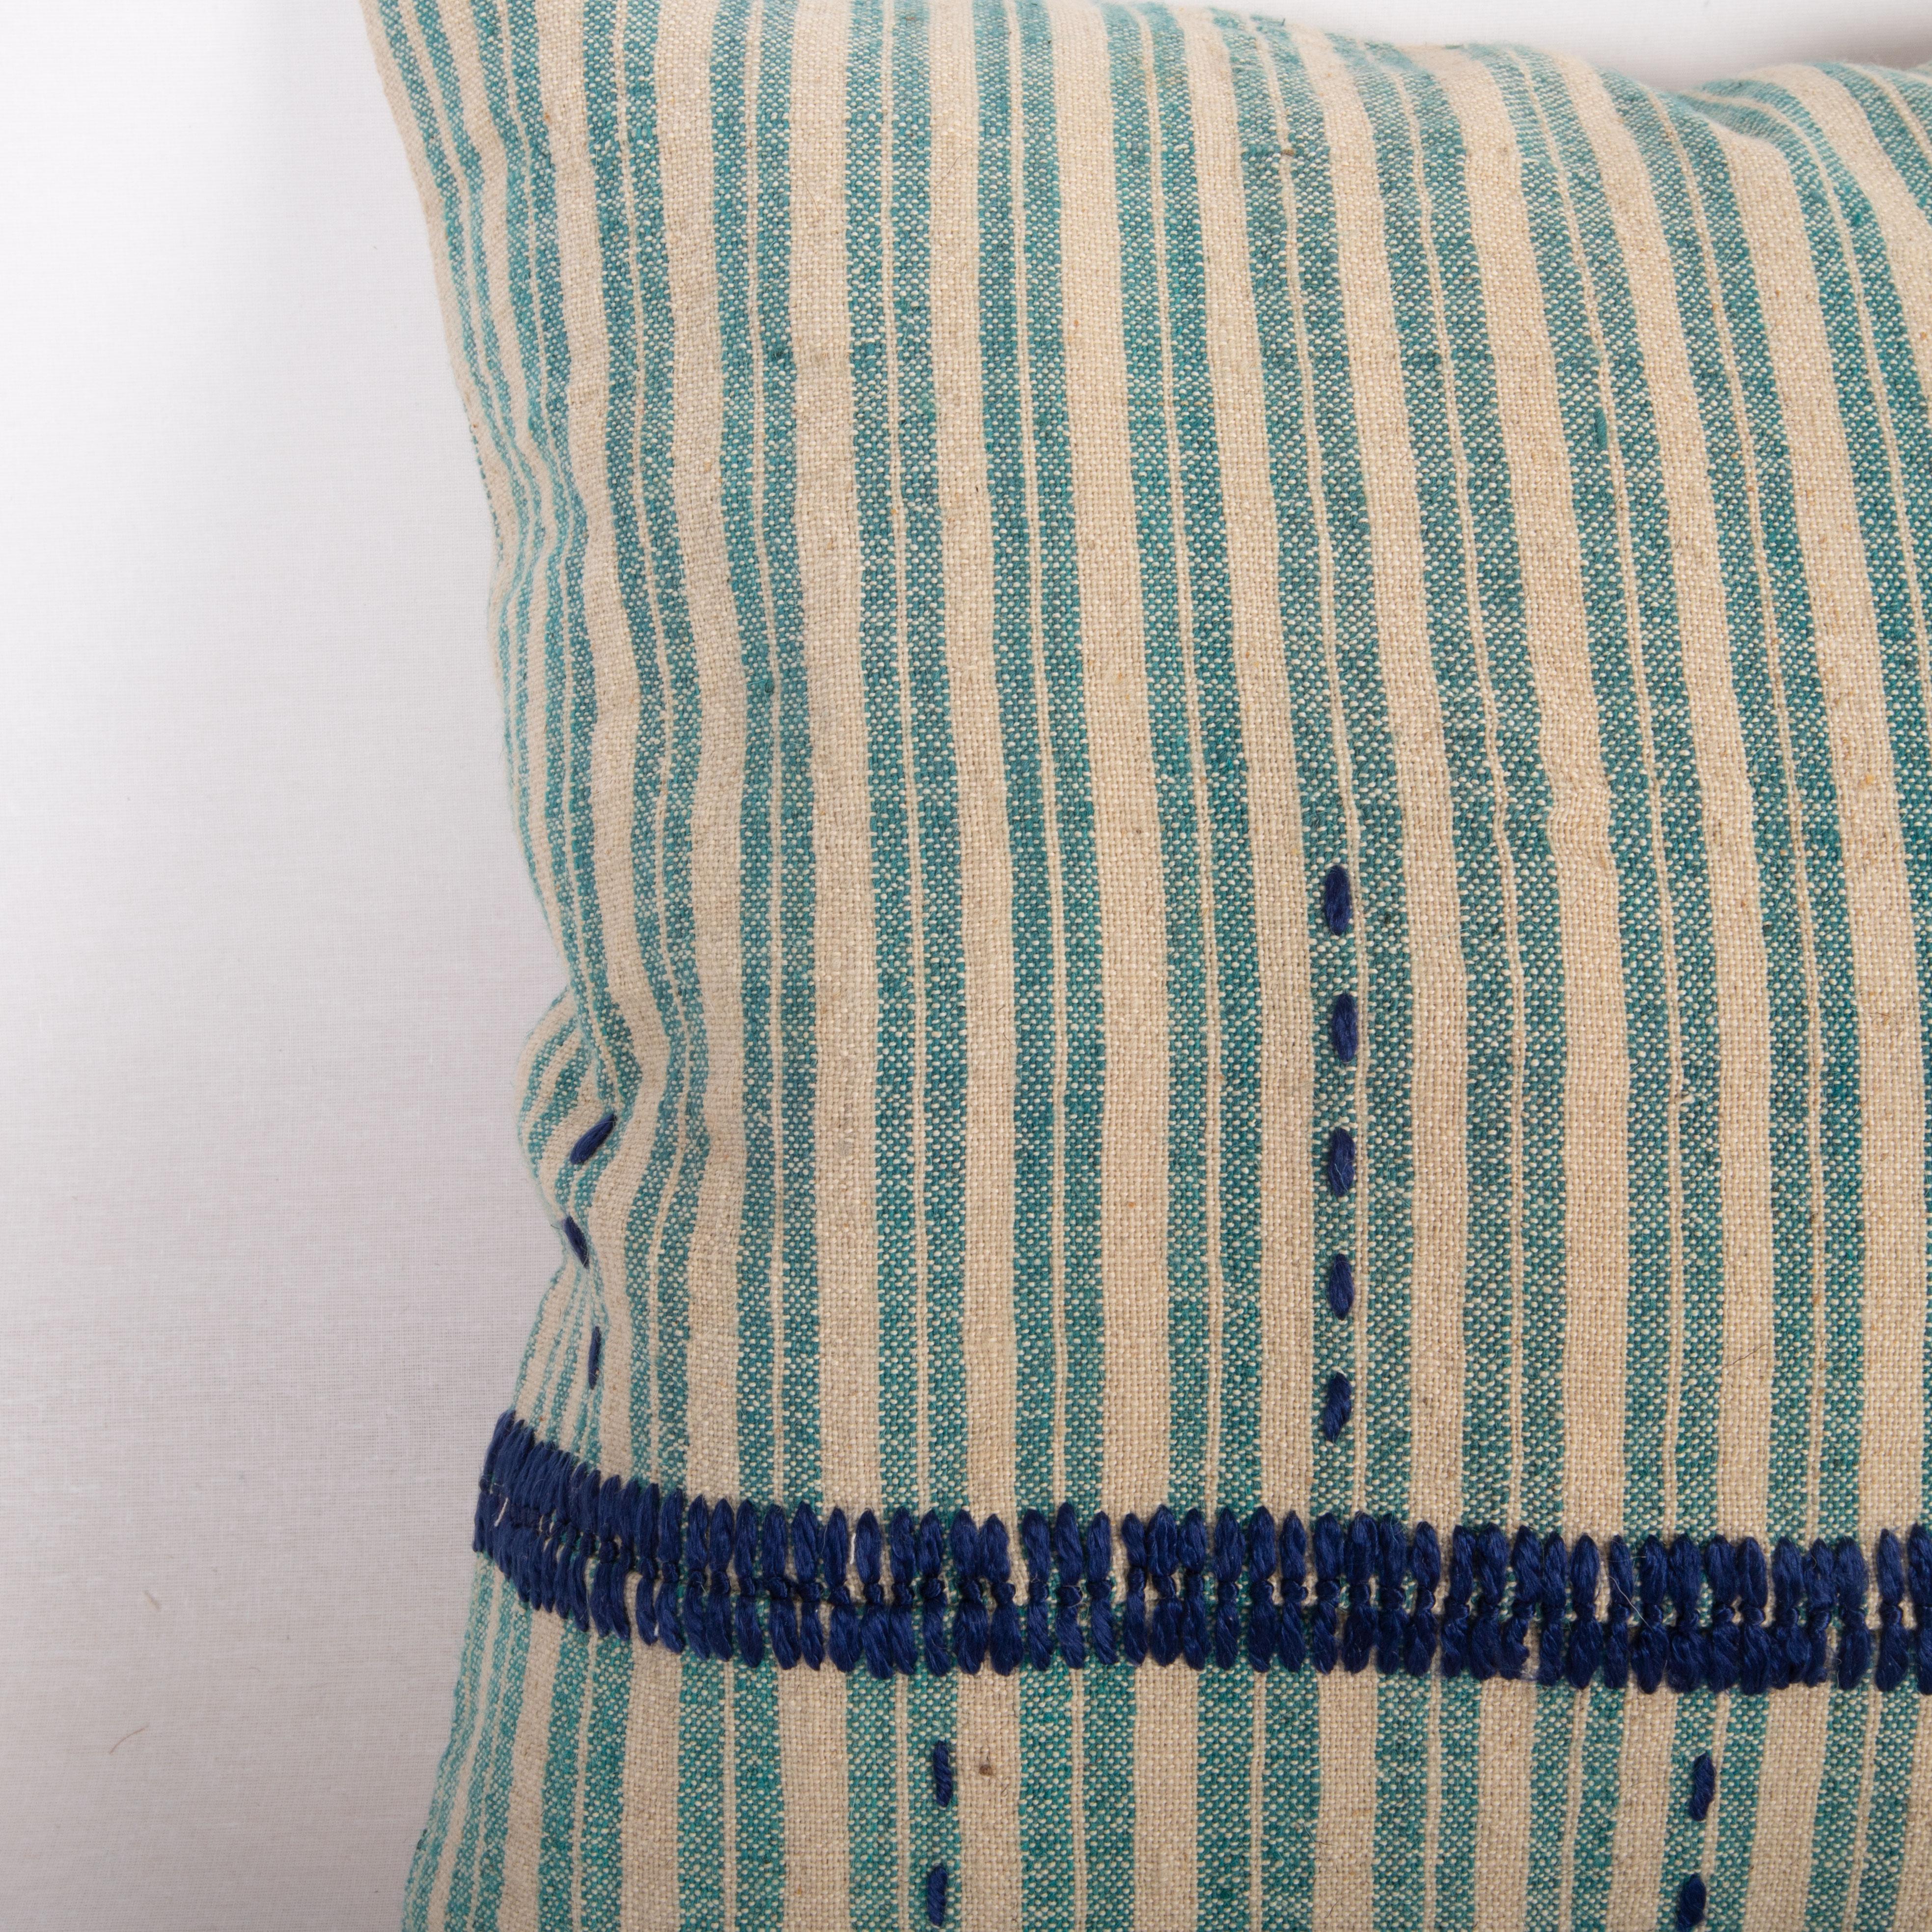 Hand-Woven Pillow Case Made from an Anatolian Cover, Mid 20th C. For Sale